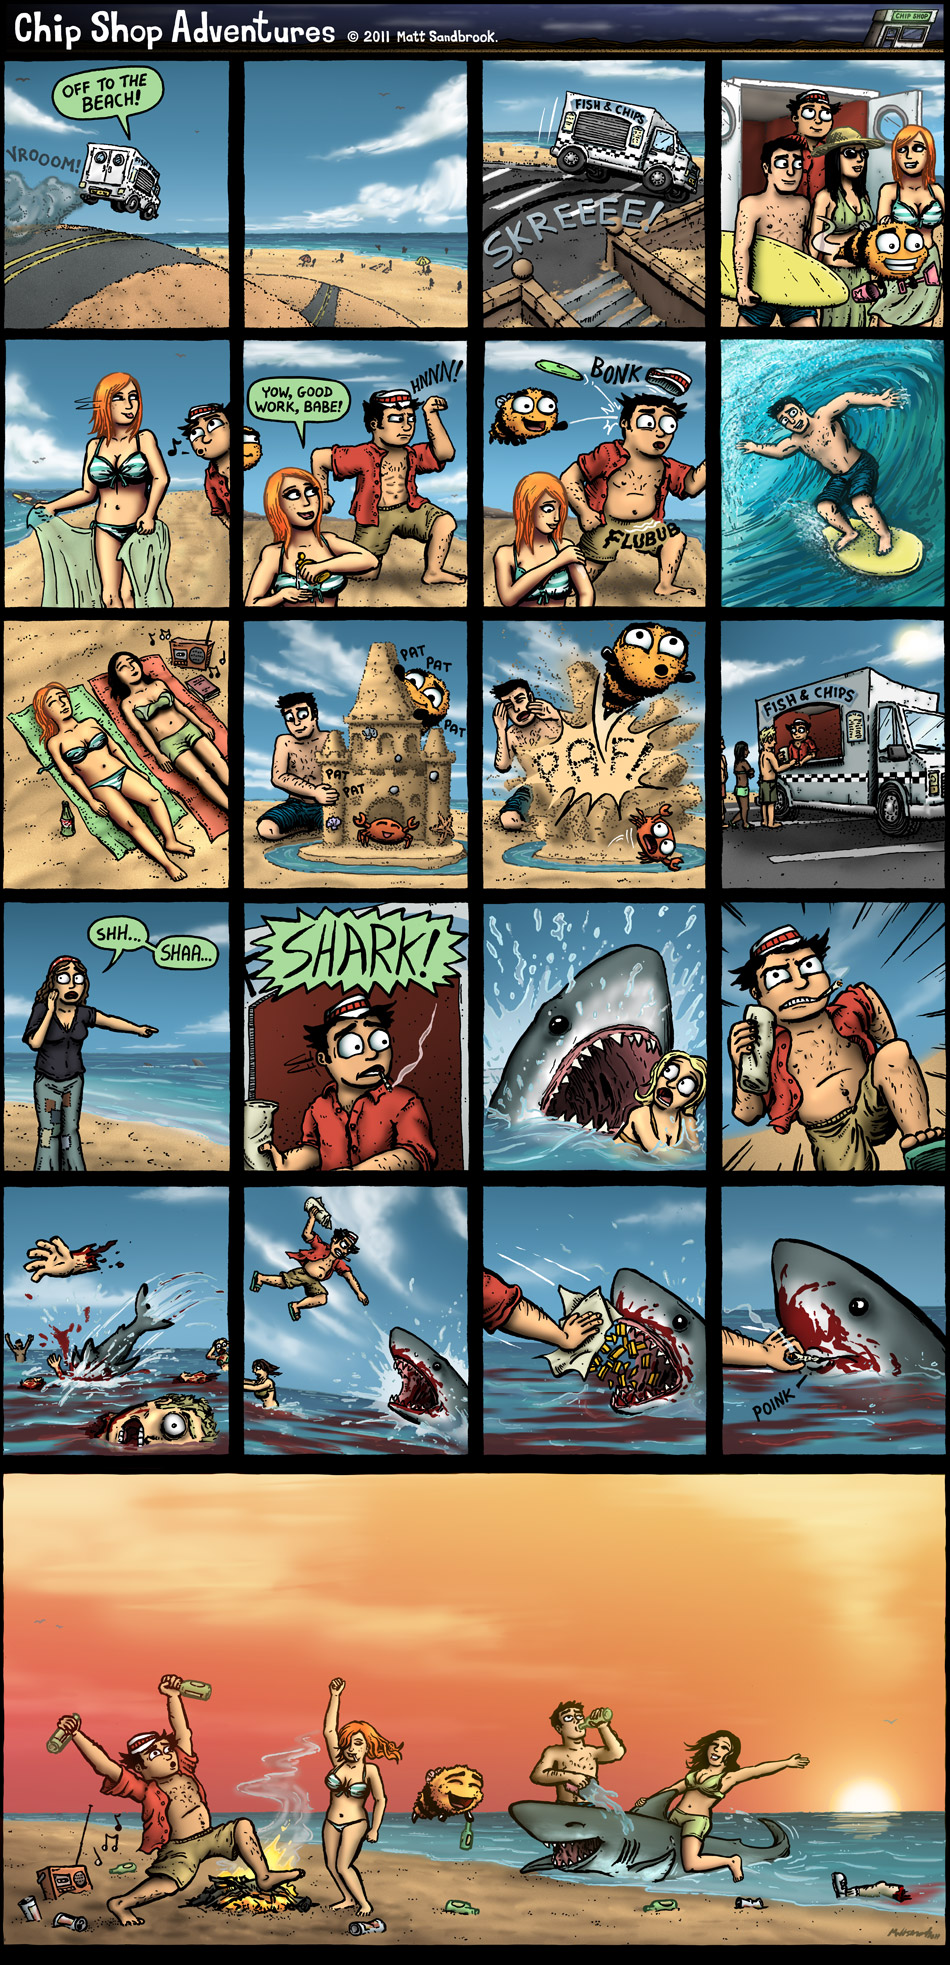 Chip Shop Adventures #300 - Off to the Beach! (MEGA-COMIC)